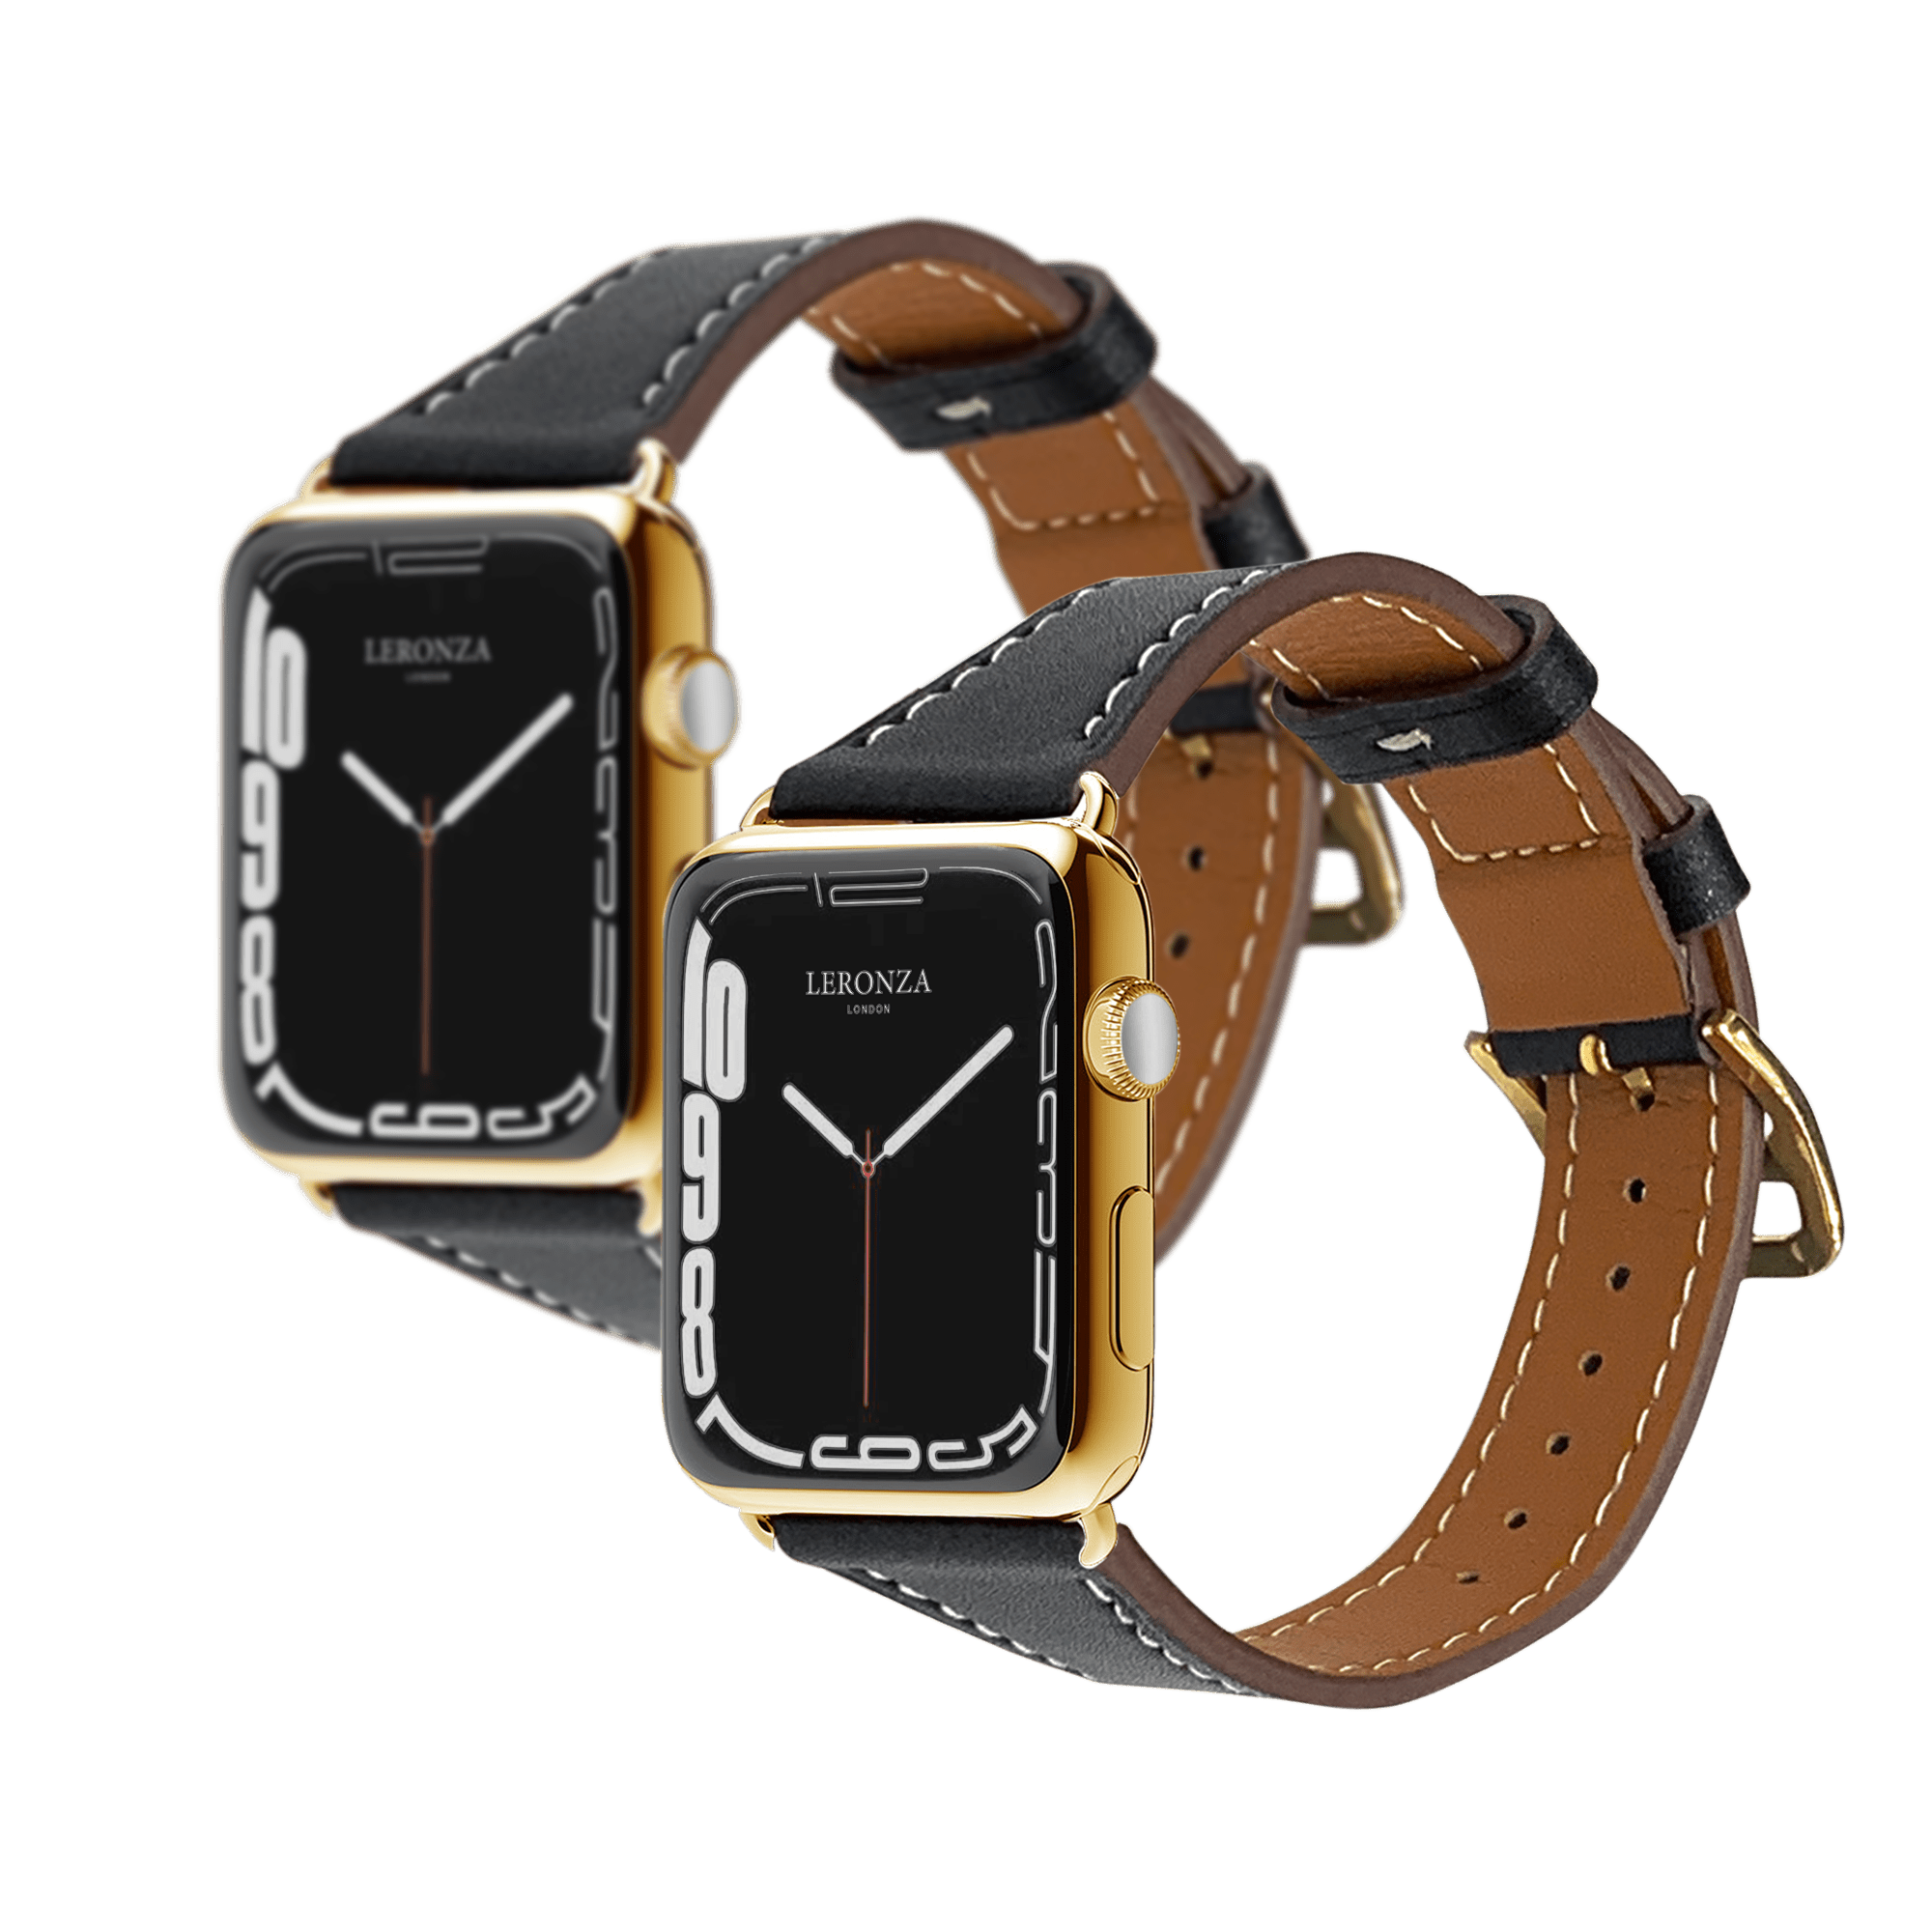 Hortory luxury watch band balck leather watch strap compatible with apple  watch 2 3 4 5 7 series watch strap